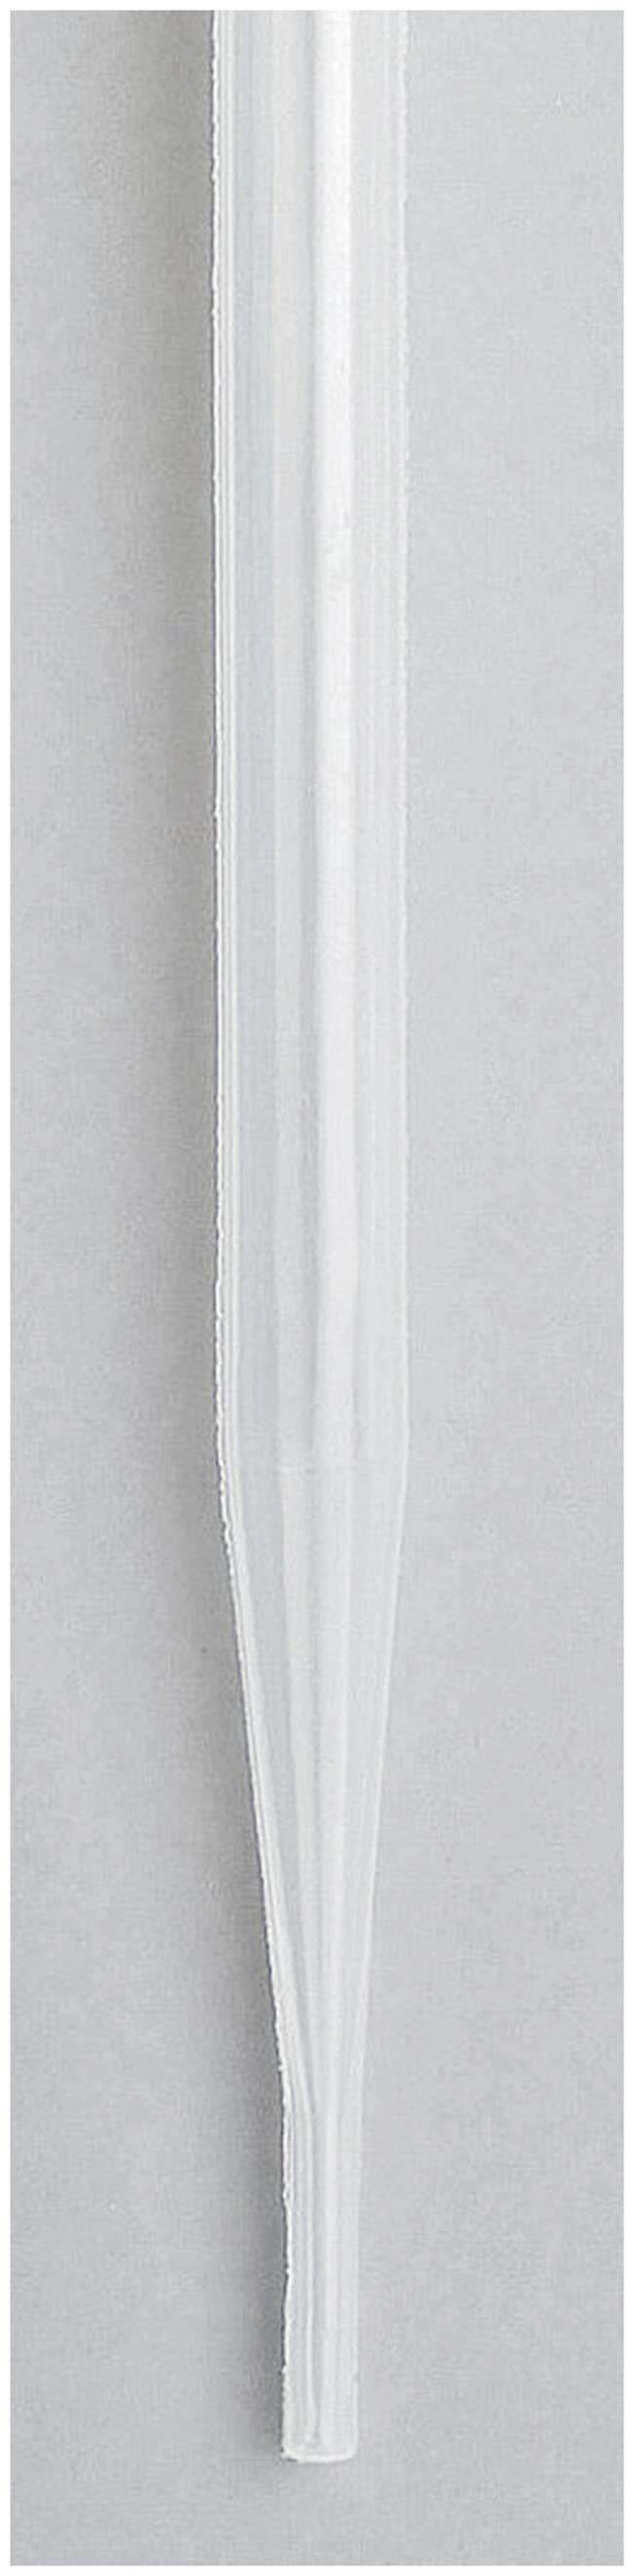 Samco Extra Long Transfer Pipettes